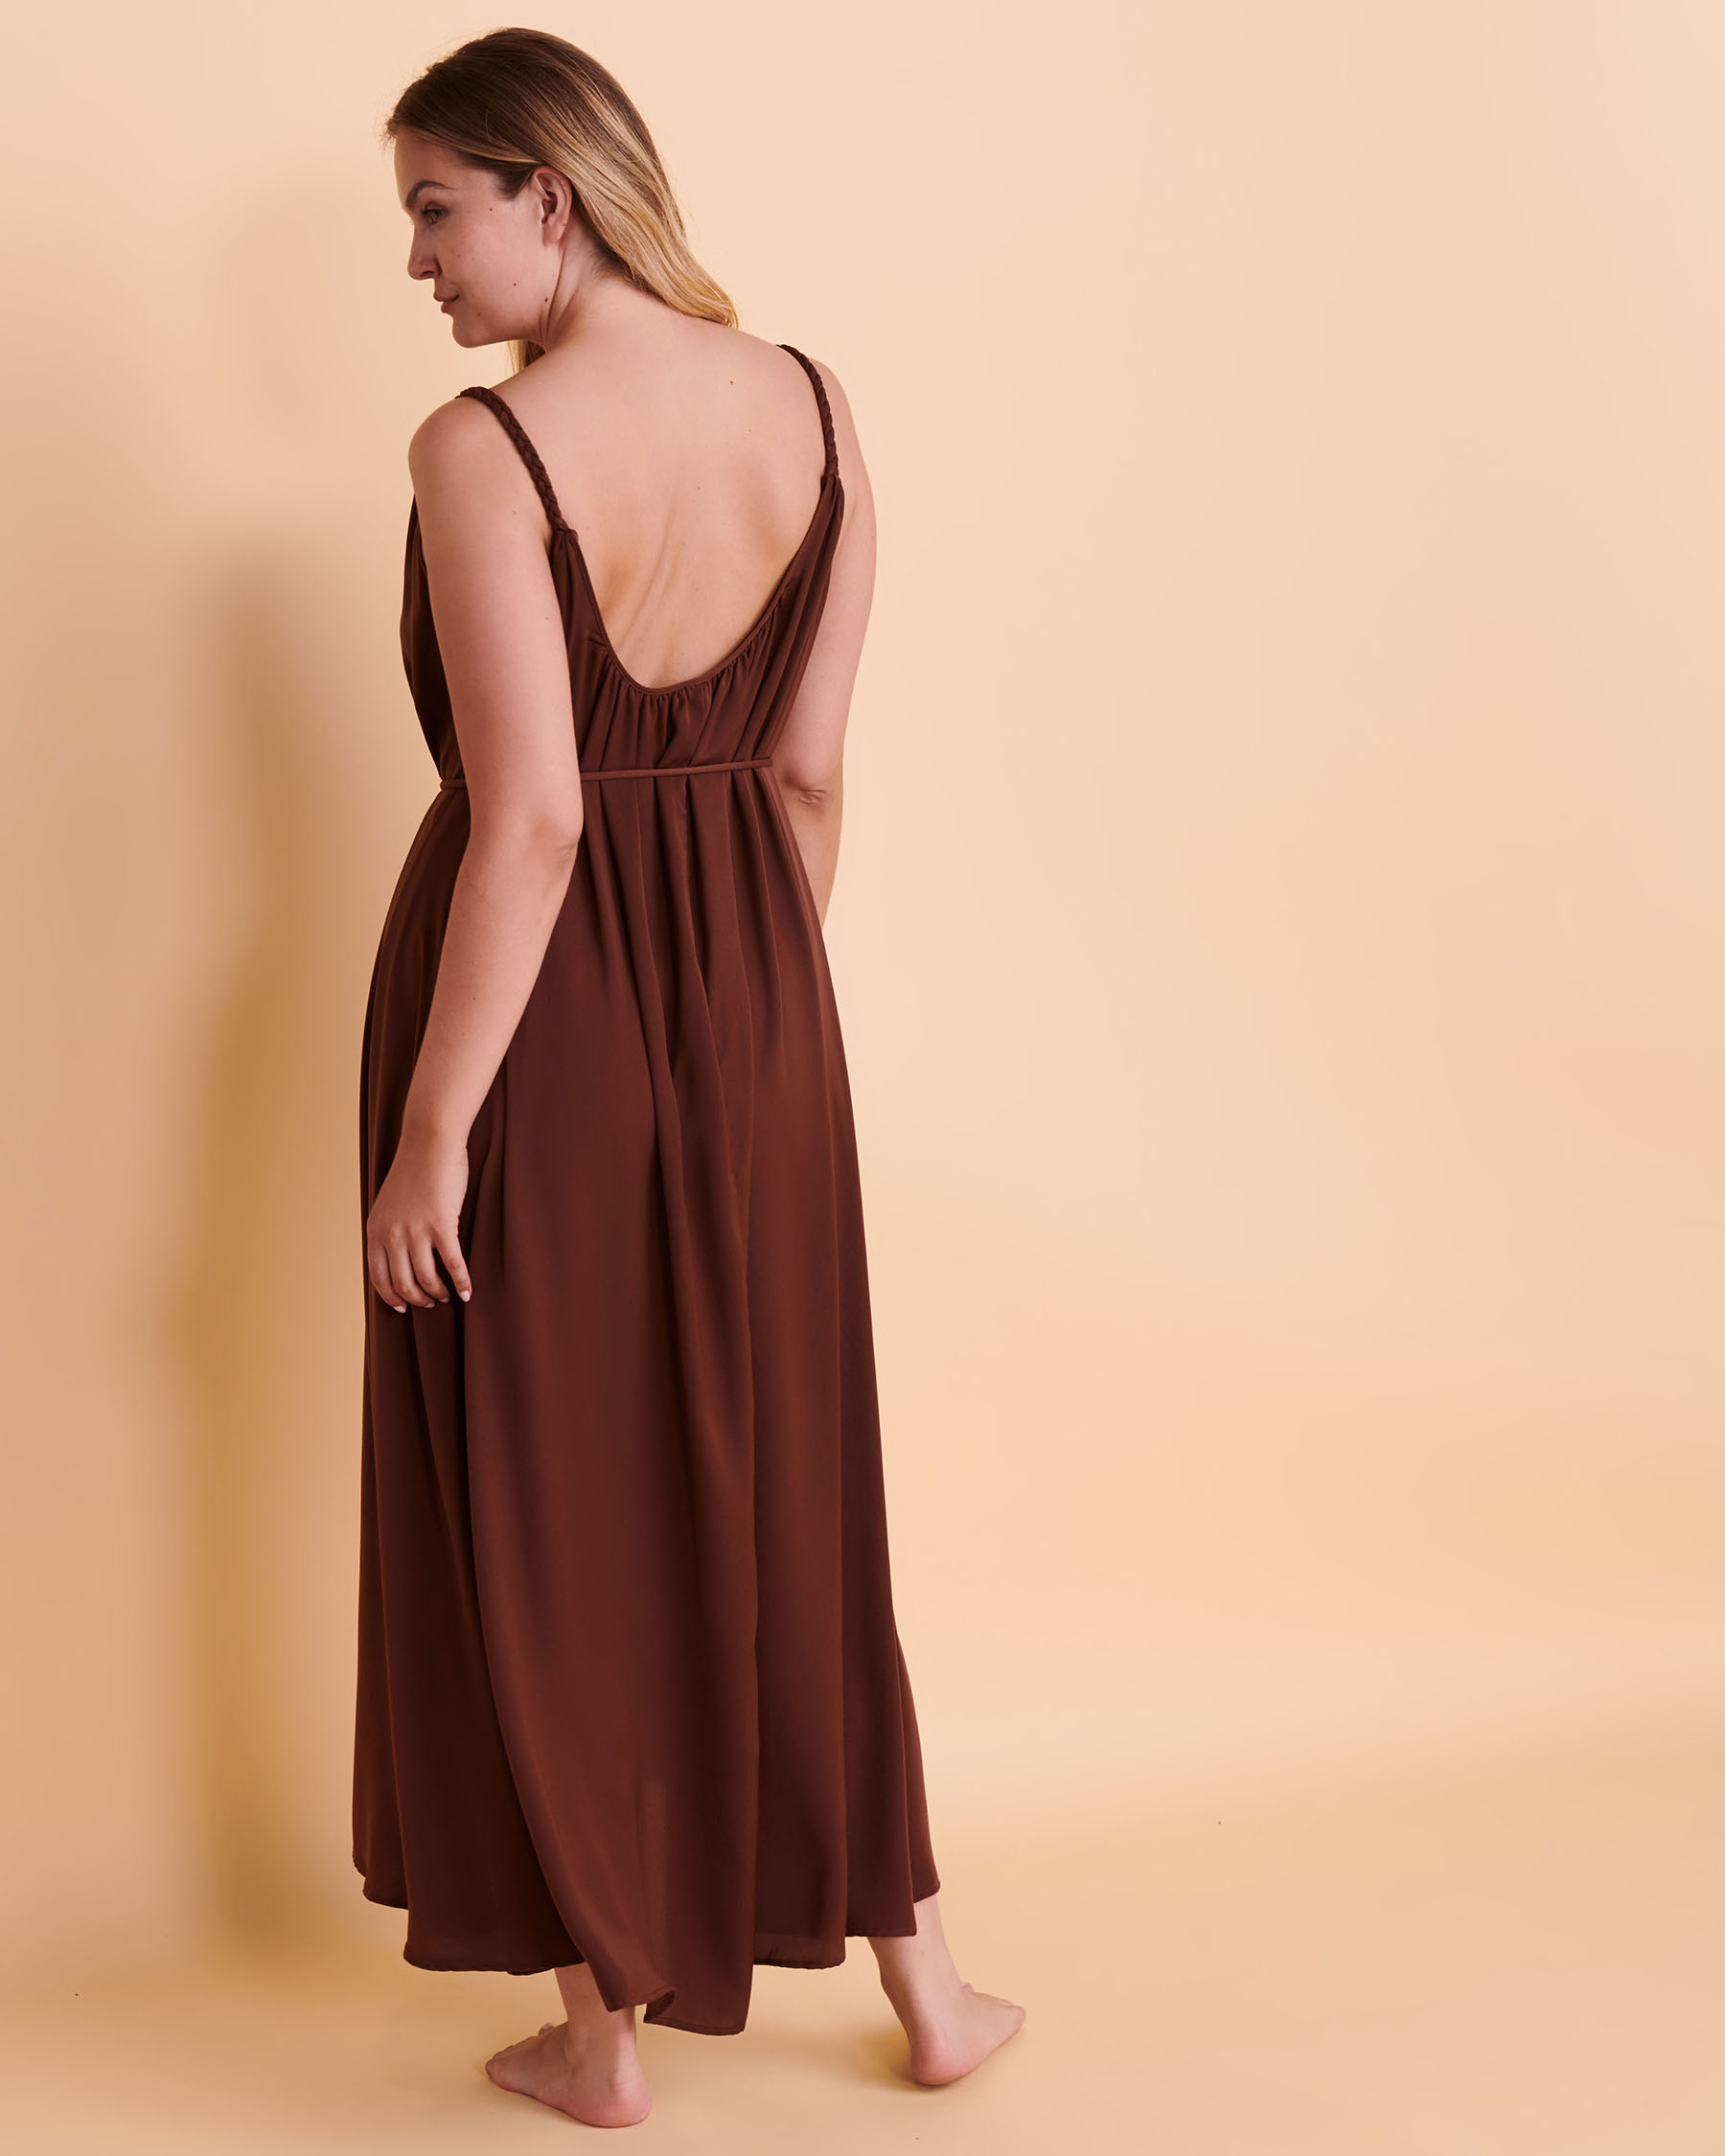 SANTEMARE Open Back Maxi Dress Brown 02300065 - View2